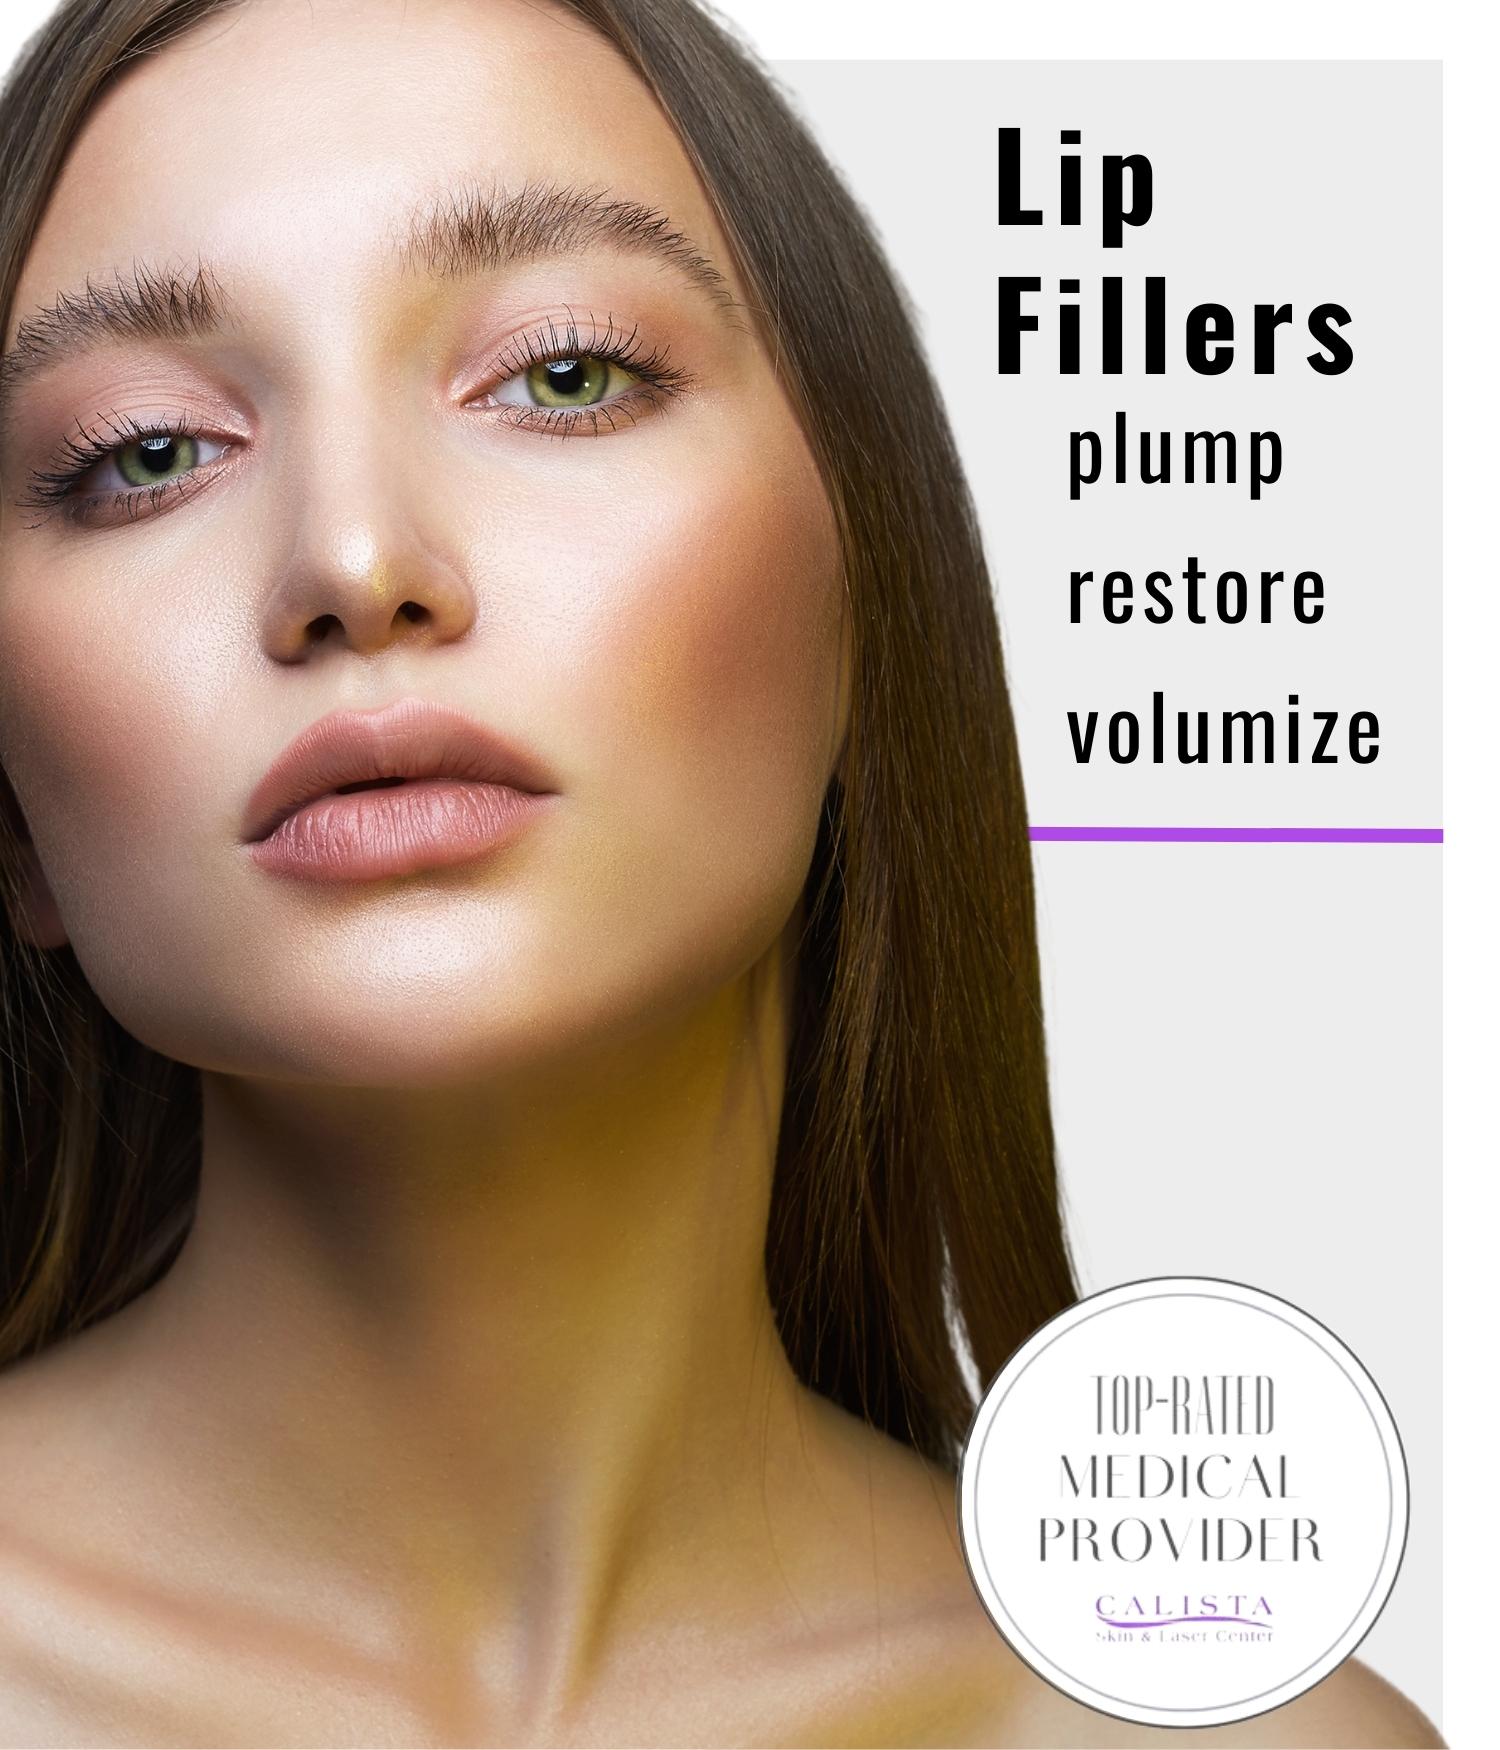 A Hero image featuring a beautiful woman with beautiful lips with the words: Lip Fillers; Plump, Restore, and Volumize.